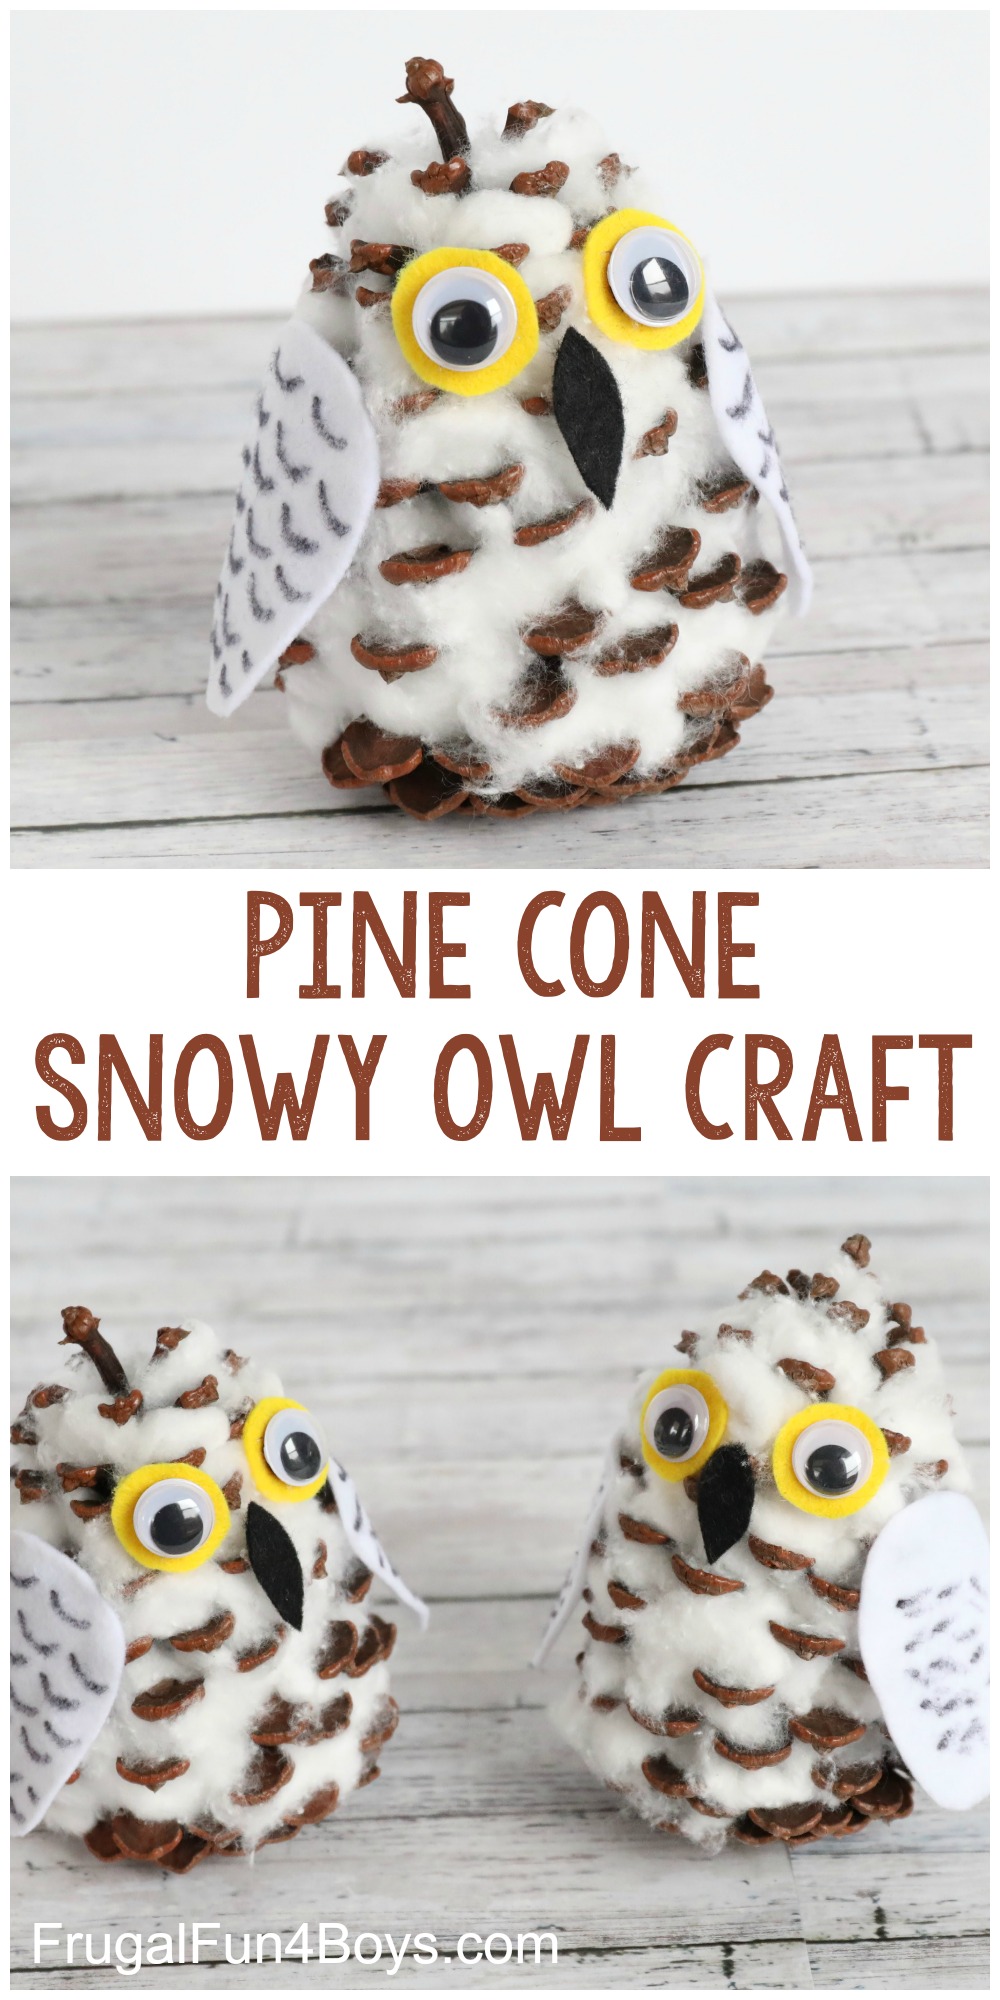 Pine Cone Snowy Owl Craft for Kids